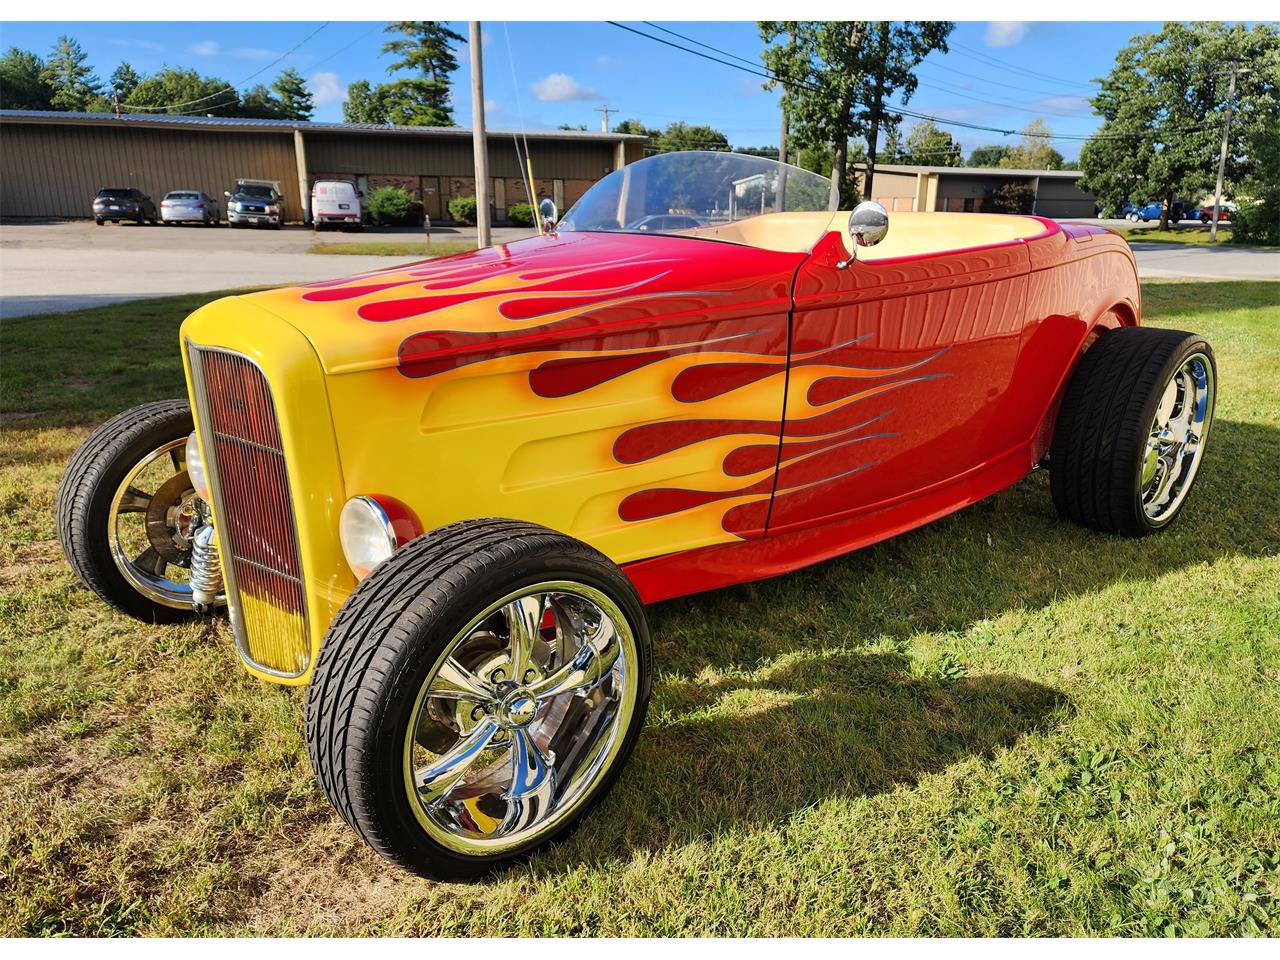 For Sale: 1932 Ford Highboy in hopedale, Massachusetts for sale in Hopedale, MA